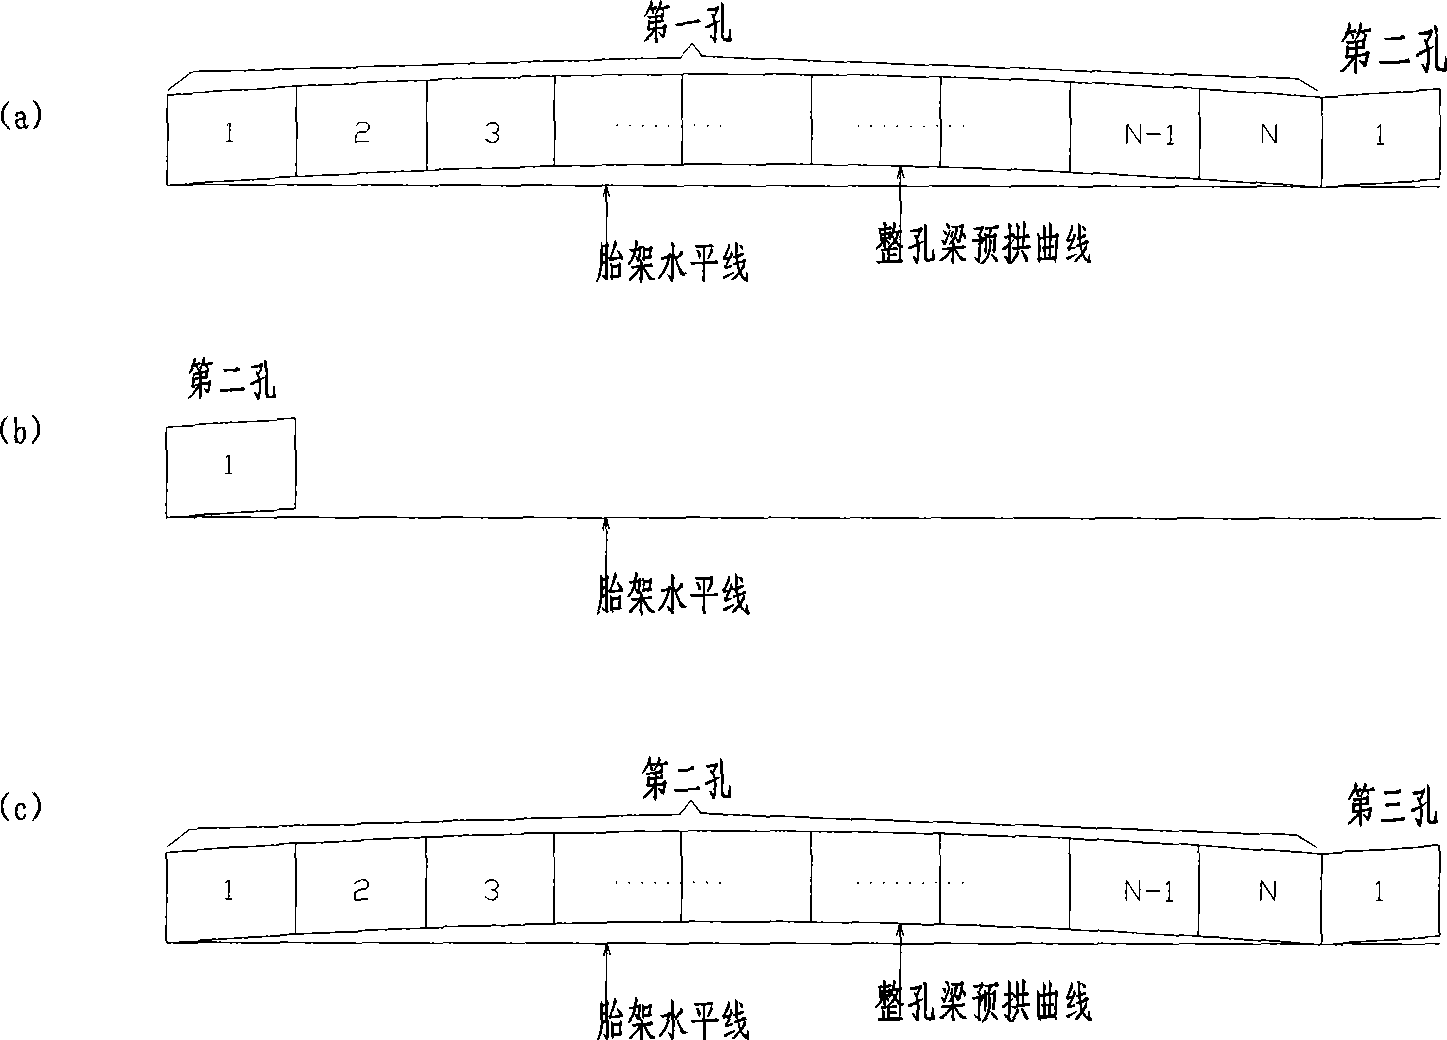 Long continuous structural steel box beam or combination box beam construction method